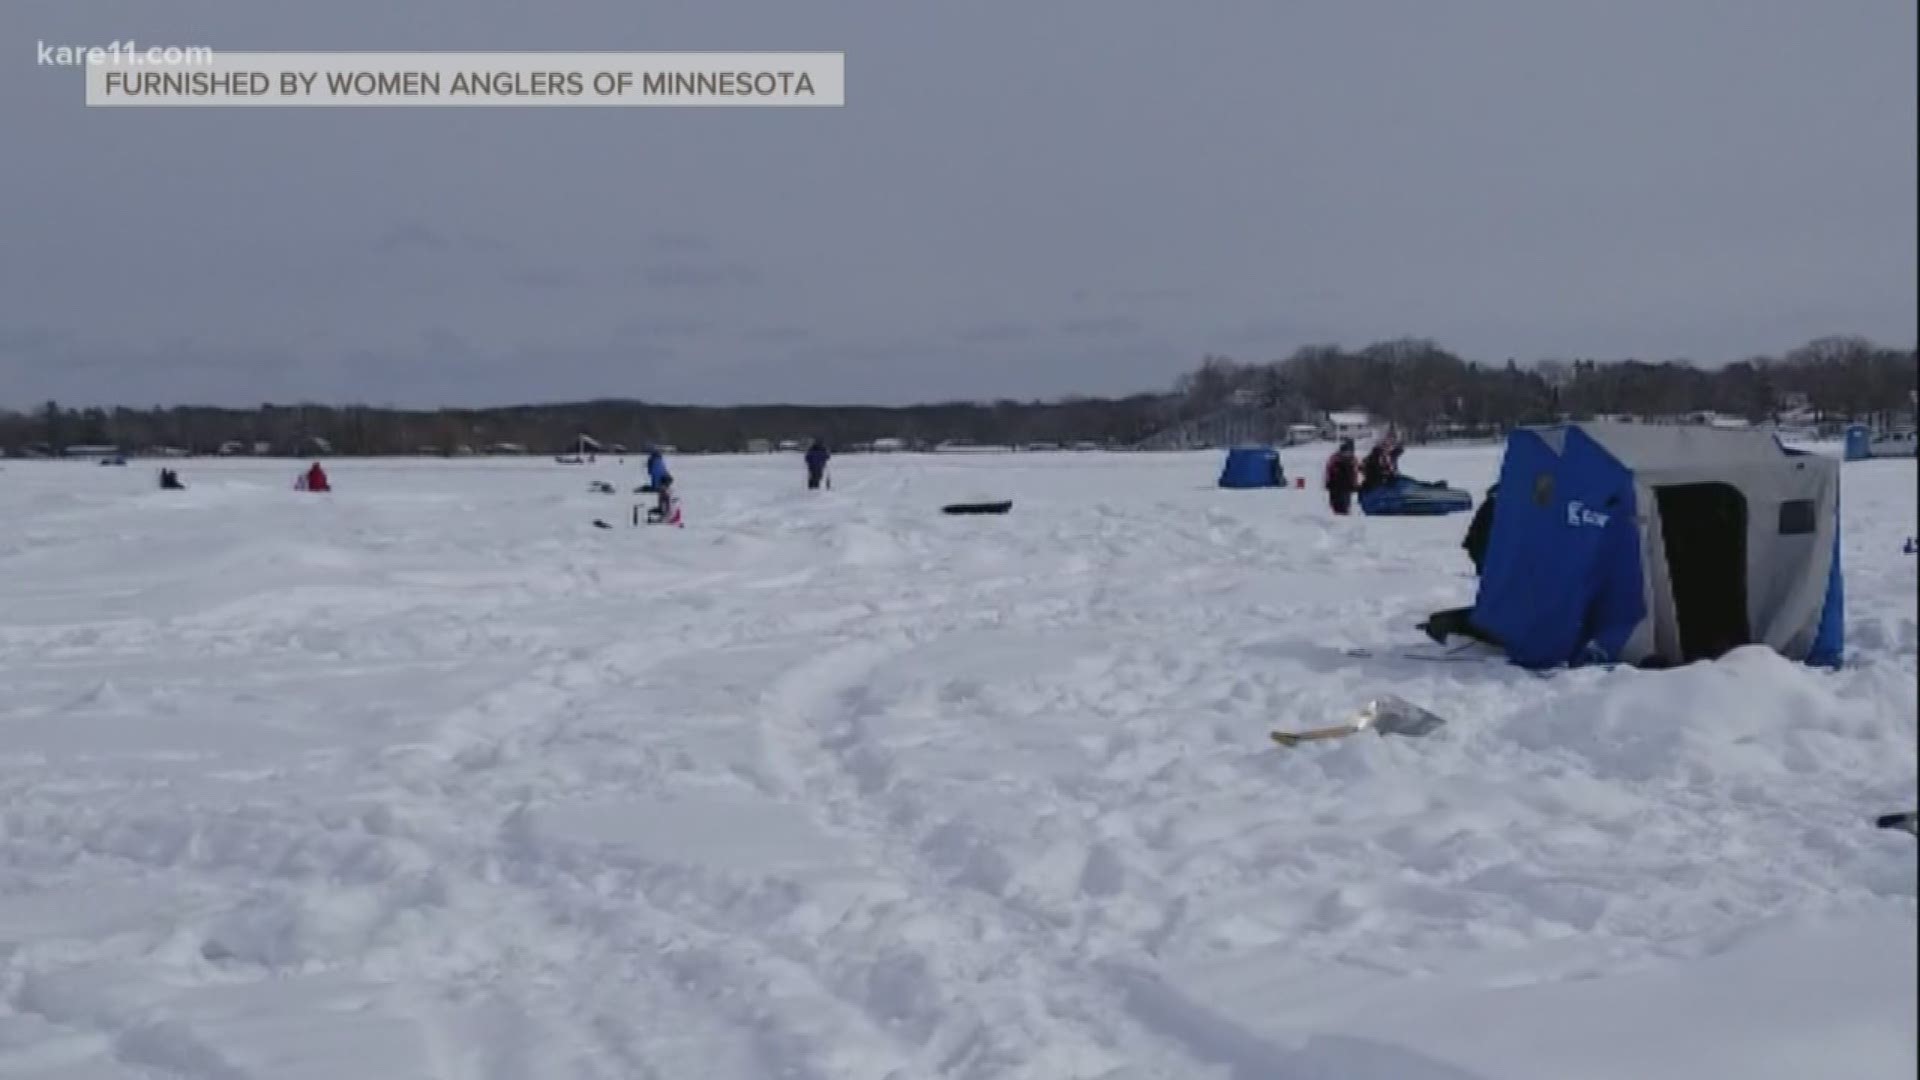 150 women from across the Midwest took part in the 2nd Annual Women's Only Ice Fishing Tournament on Lake Mille Lacs on Saturday. All proceeds from the tournament will help the group Women Anglers of Minnesota to provide fishing opportunities for kids and women.